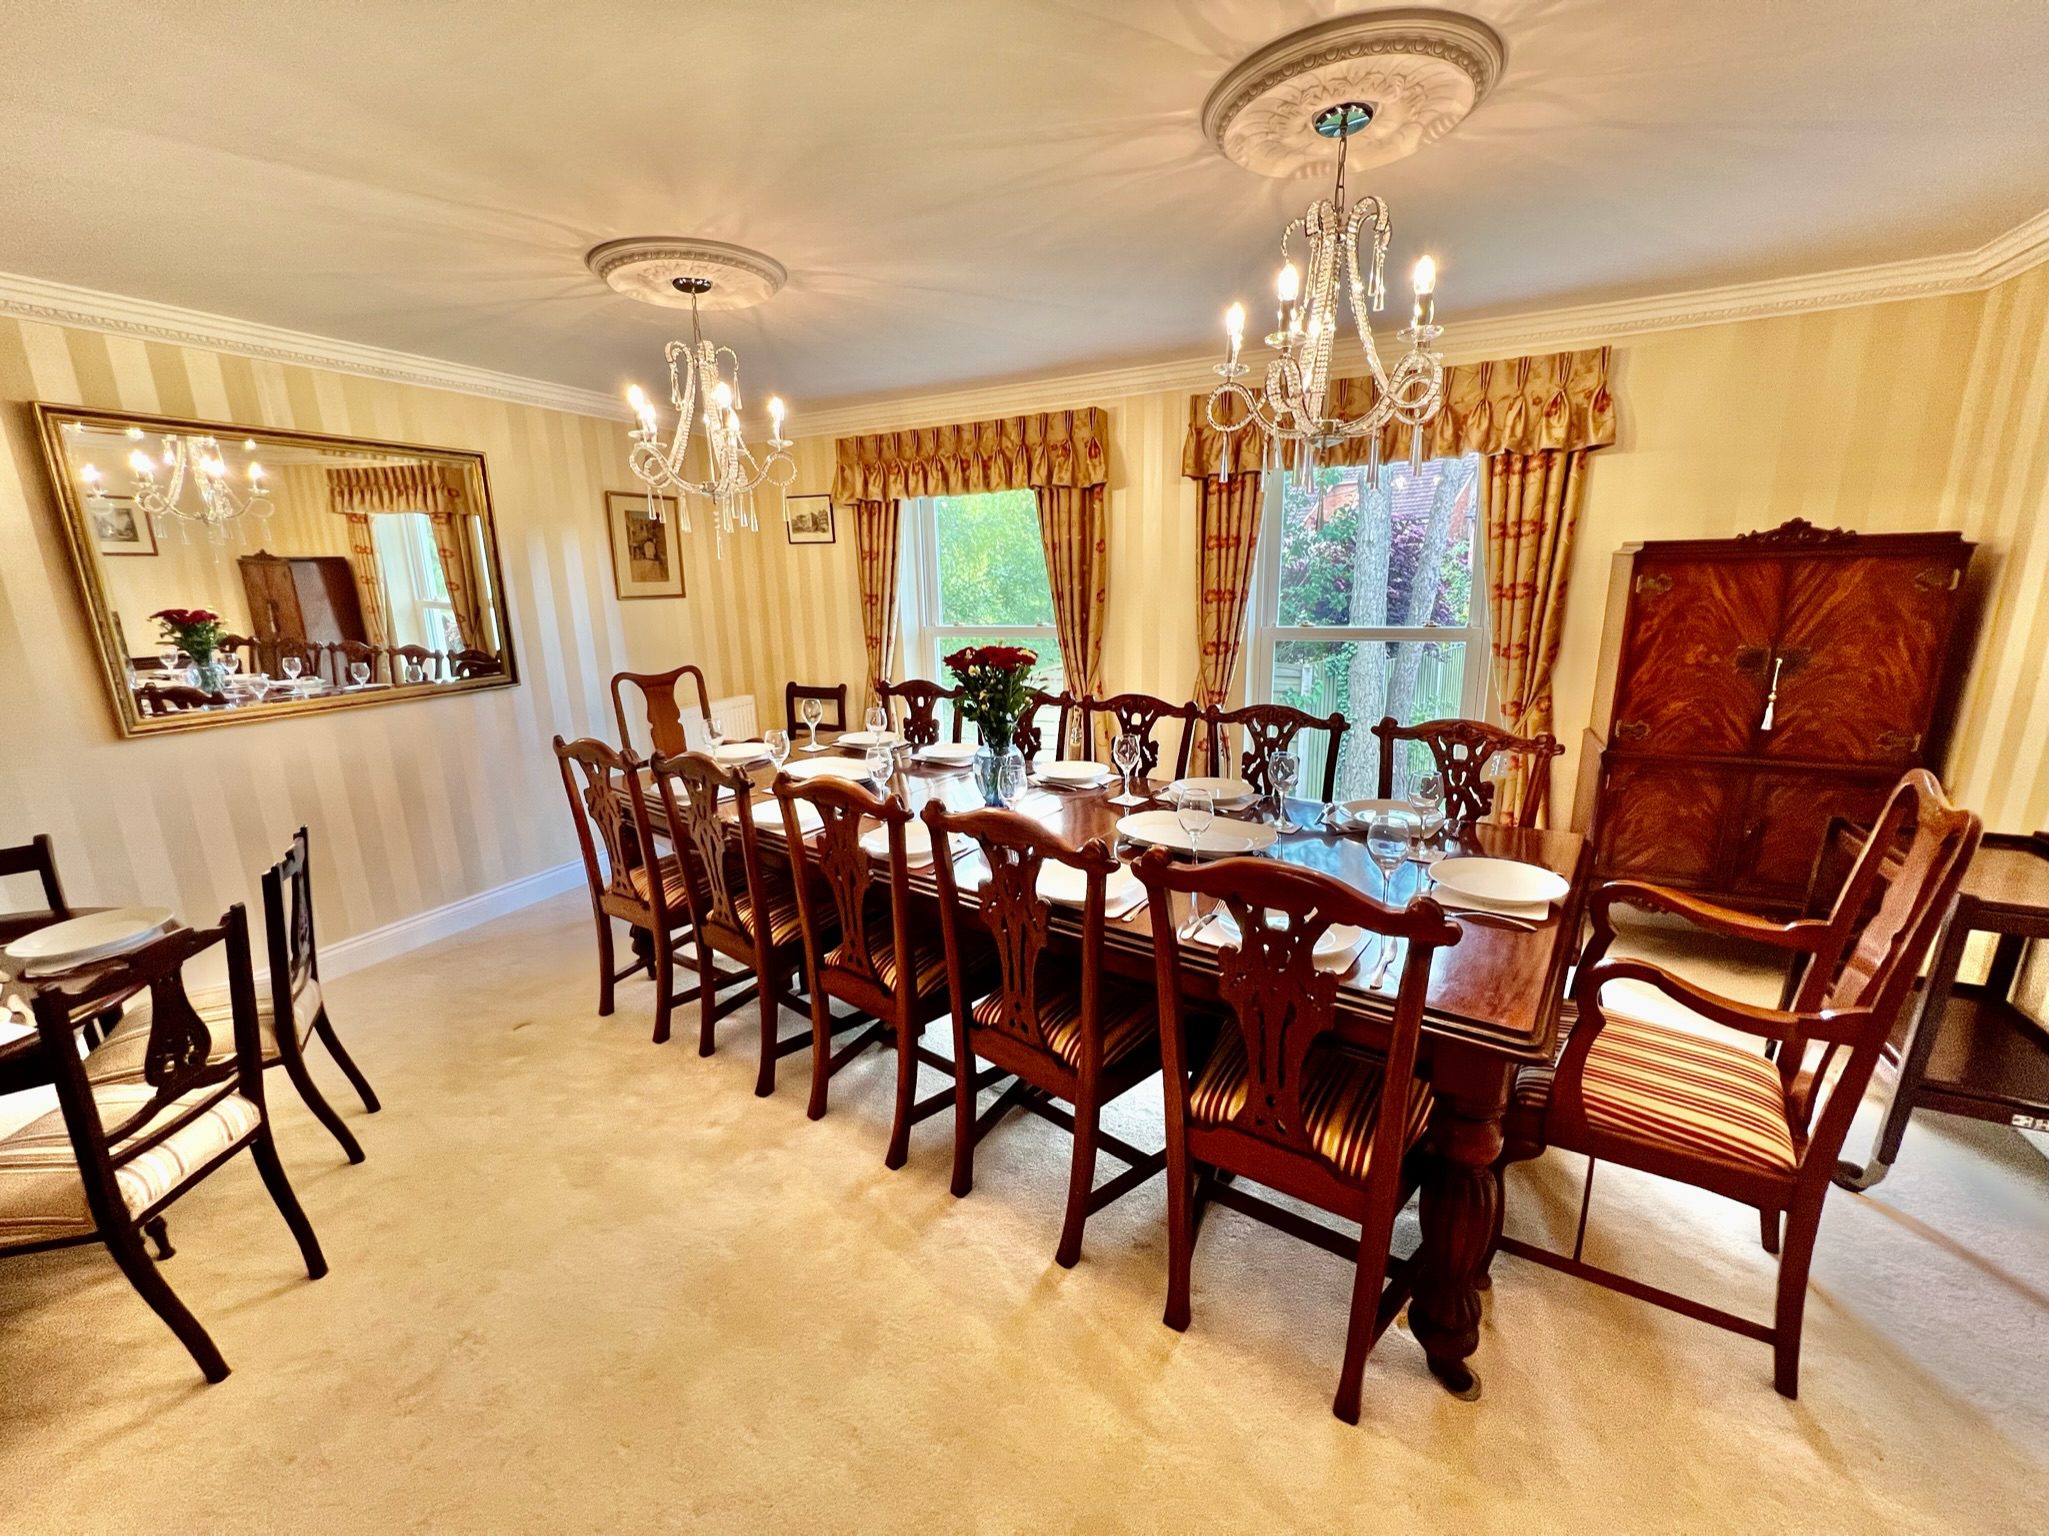 Formal dining with traditional furniture